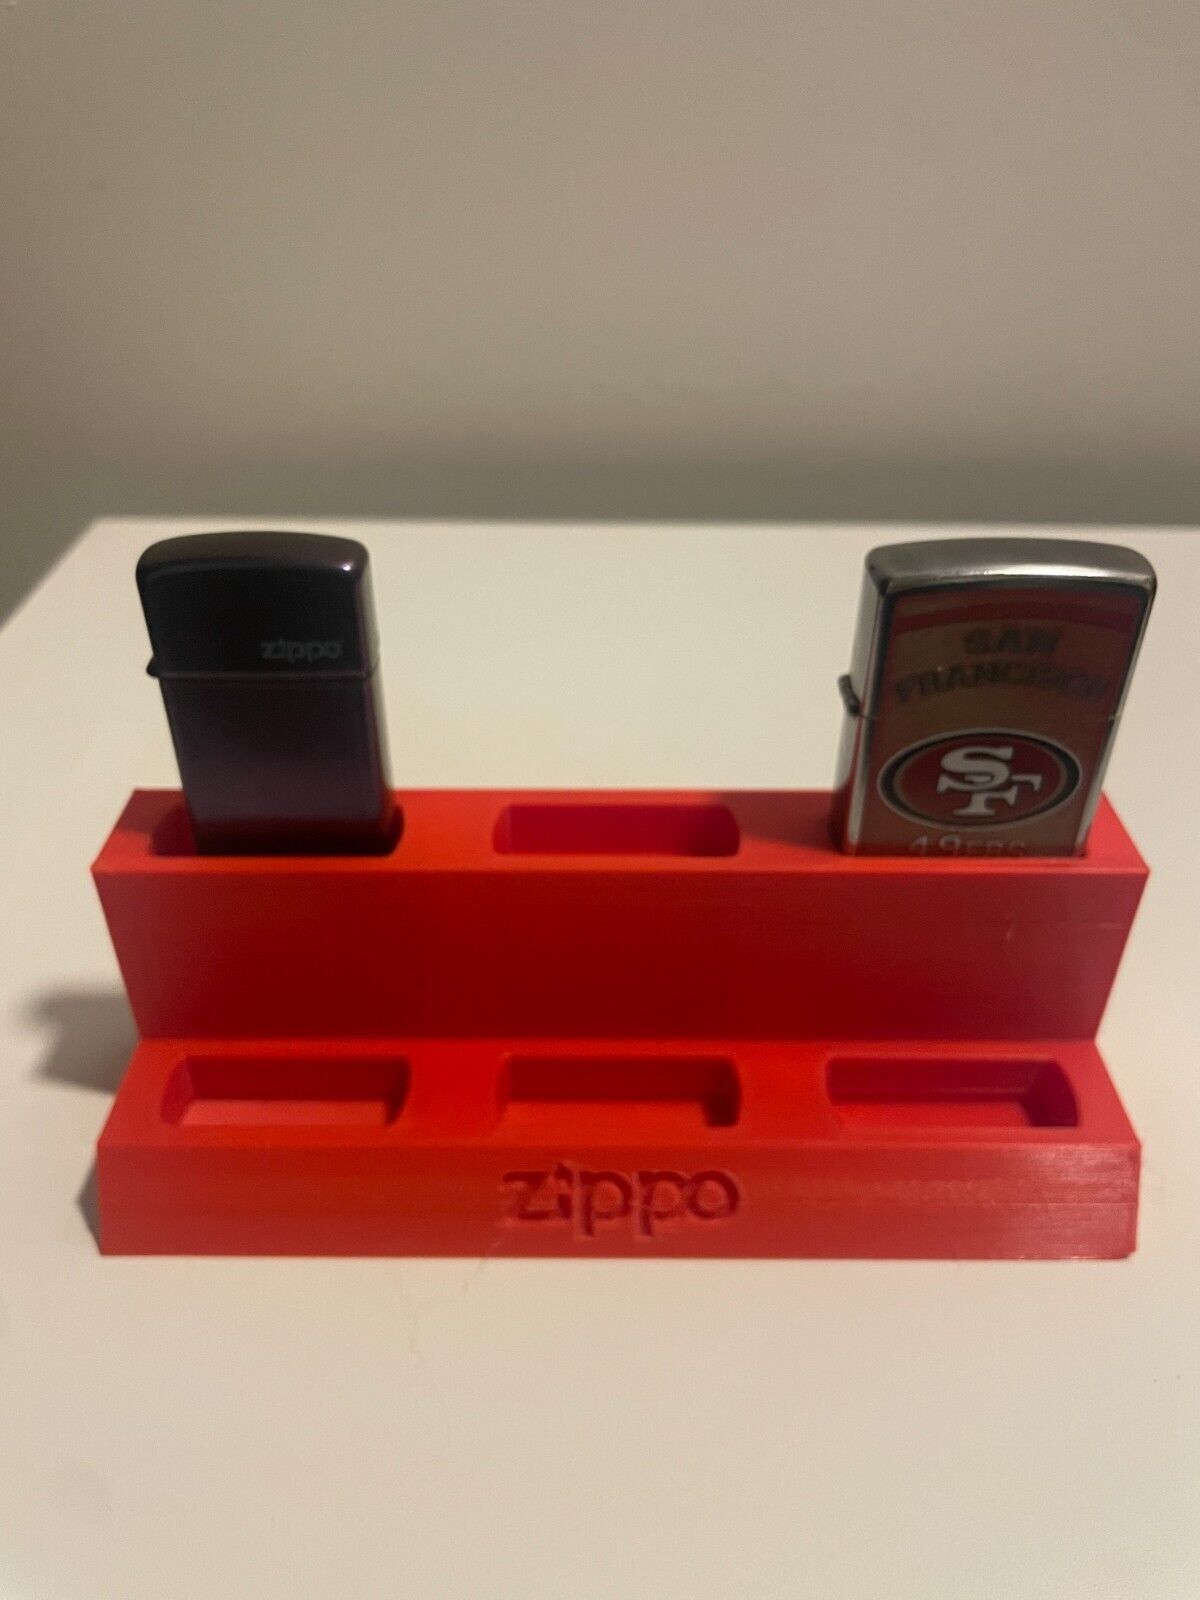 Zippo Lighter Holds 6 Display Stand Sturdy Base Holder Desktop or Shelf. Available Now for 20.50